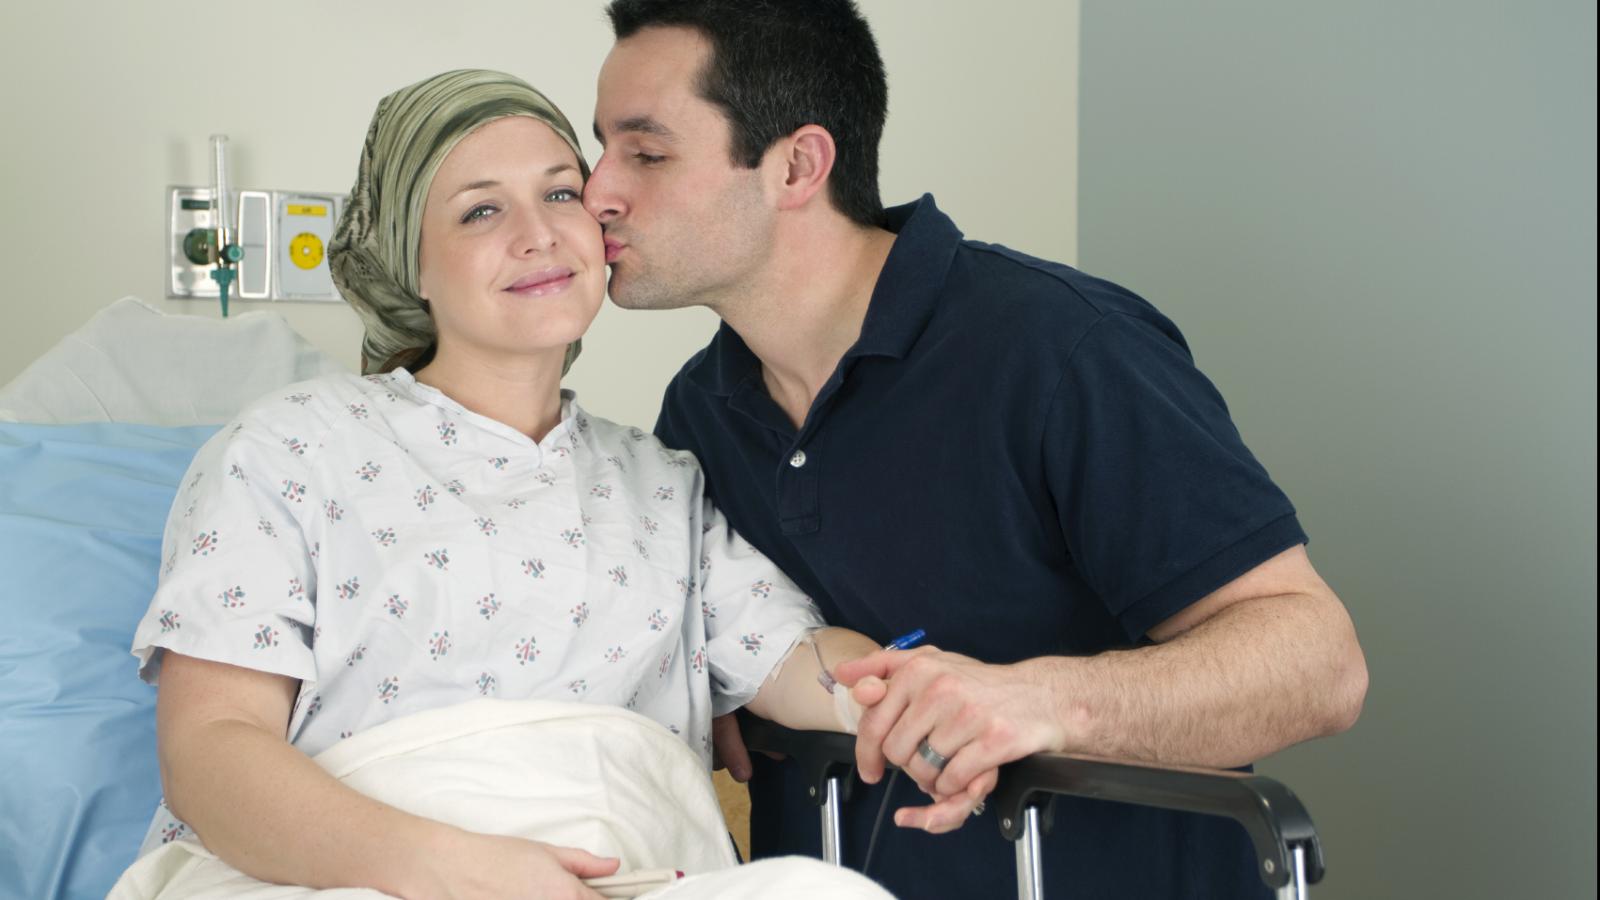 Woman in a hospital bed getting kissed by her husband